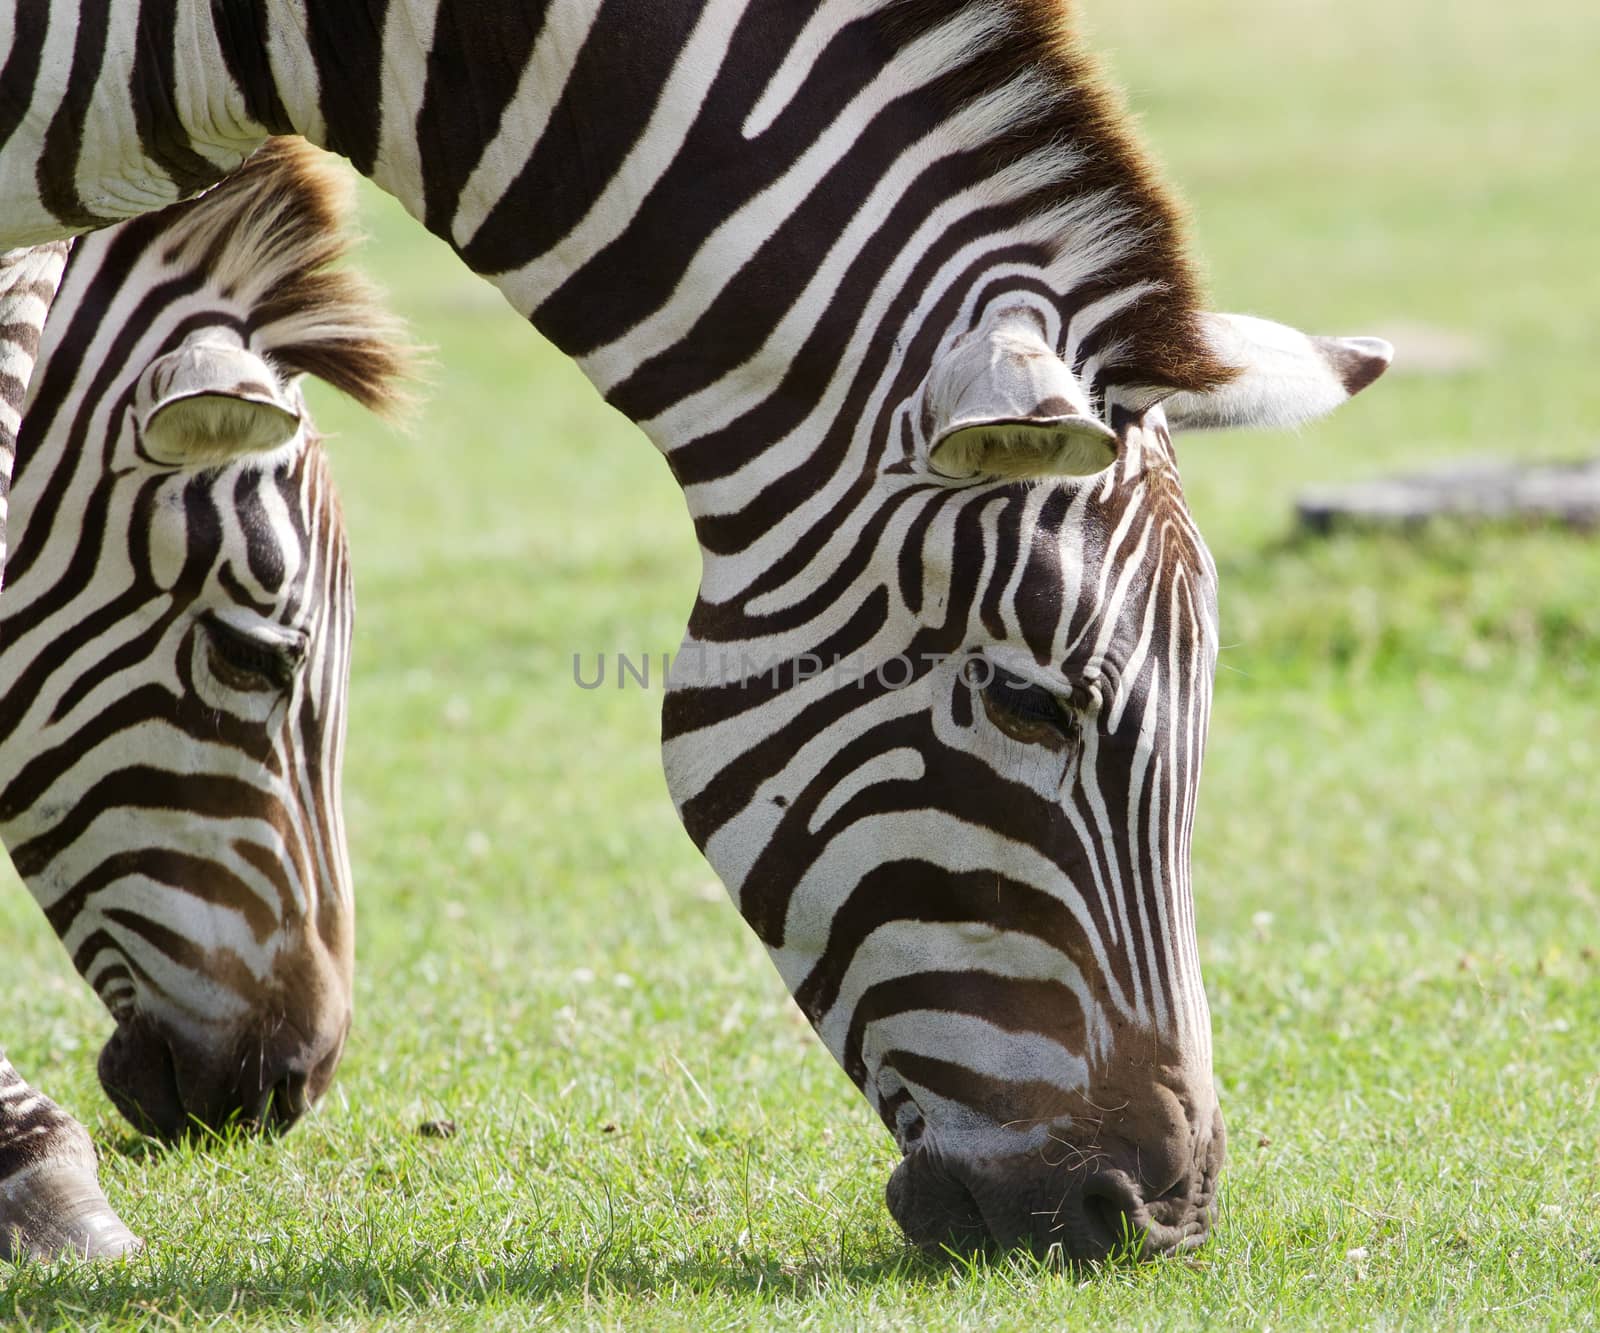 The portrait of the zebras eating the green grass on the field